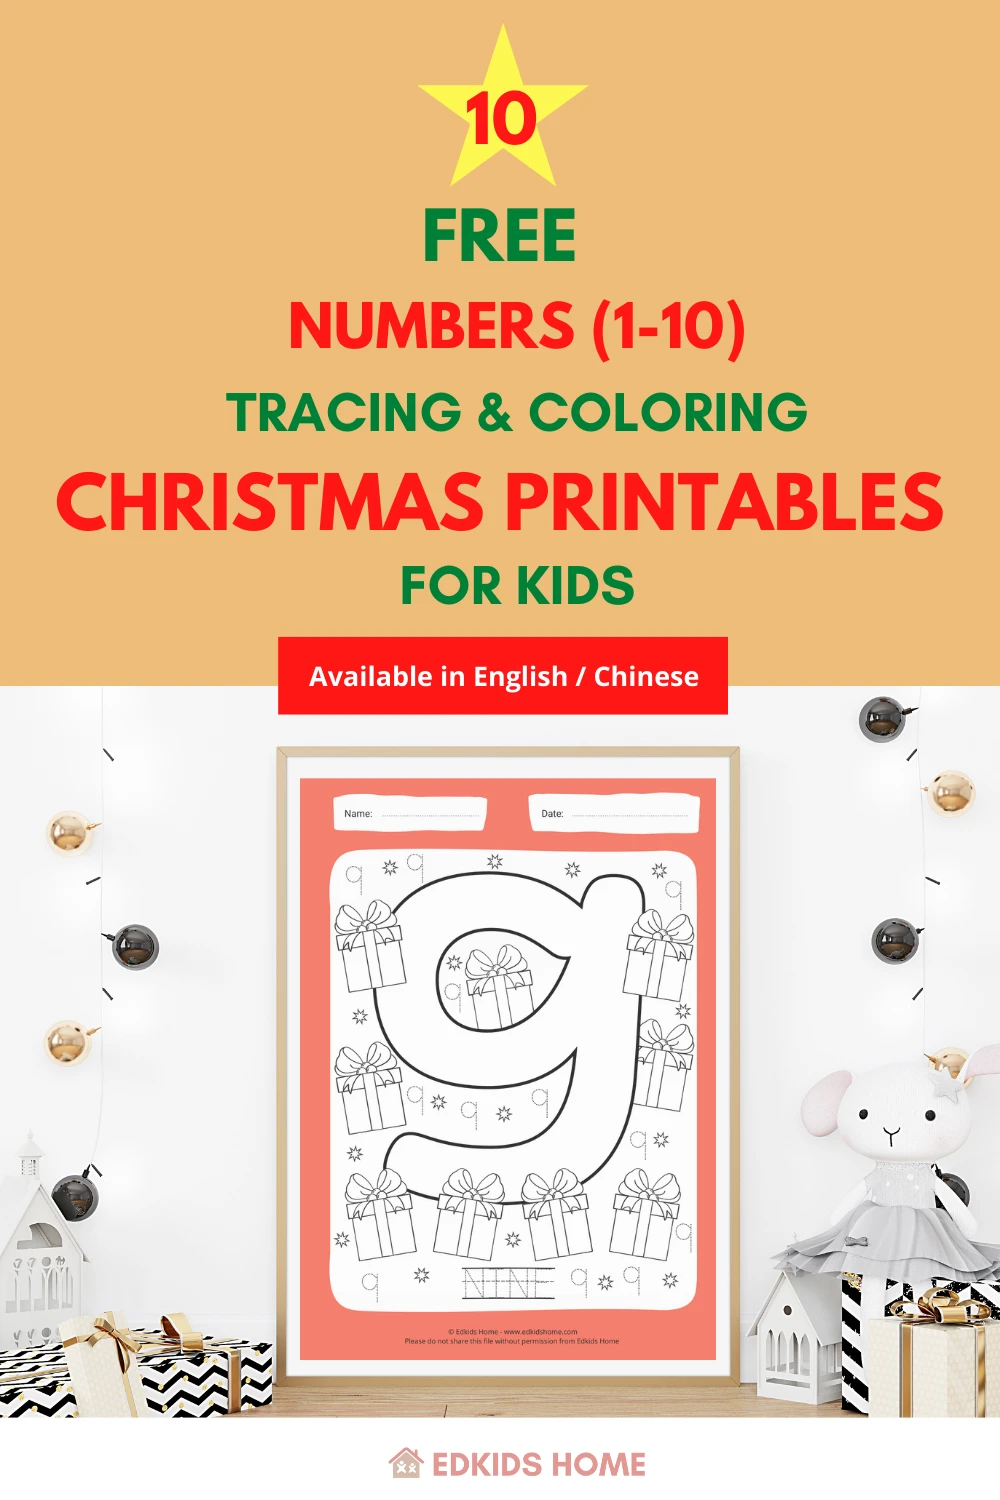 10 Free Numbers (1-10) Tracing & Coloring Christmas Worksheets for Kids (English / Chinese)